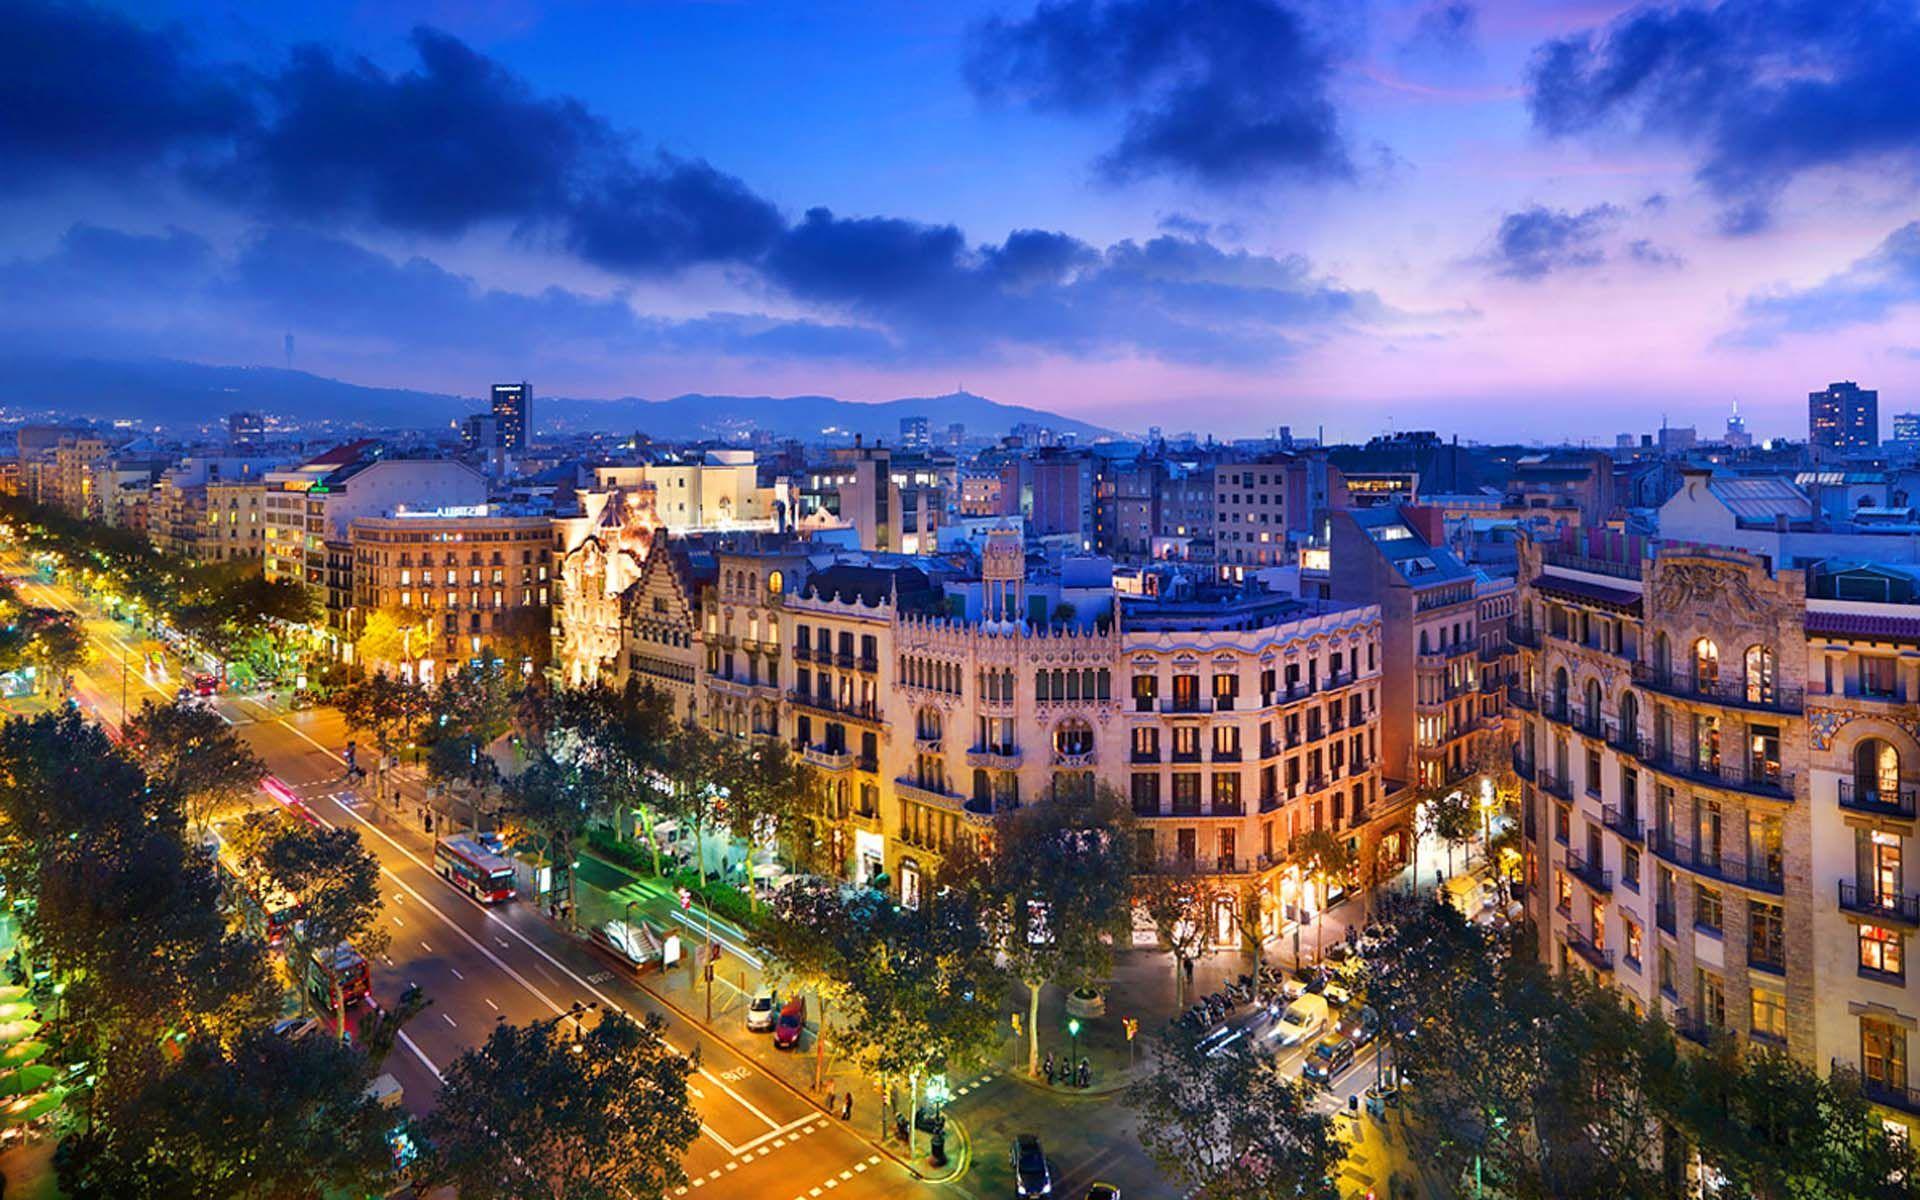 Barcelona Spain Hotels Travel Wallpaper. Best Place in The World